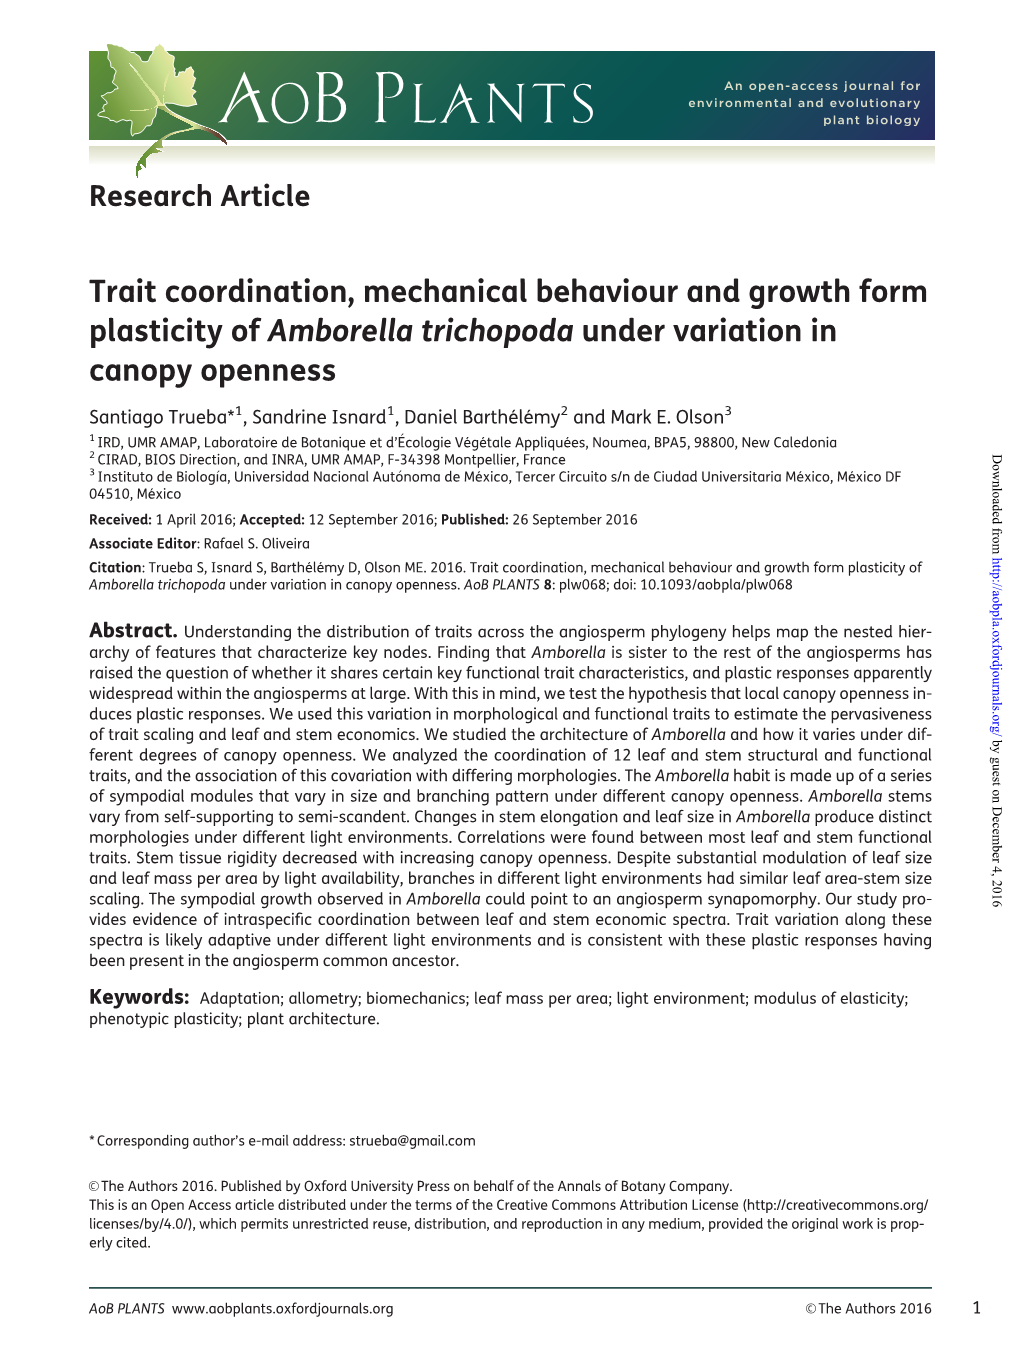 Trait Coordination, Mechanical Behaviour and Growth Form Plasticity of Amborella Trichopoda Under Variation in Canopy Openness